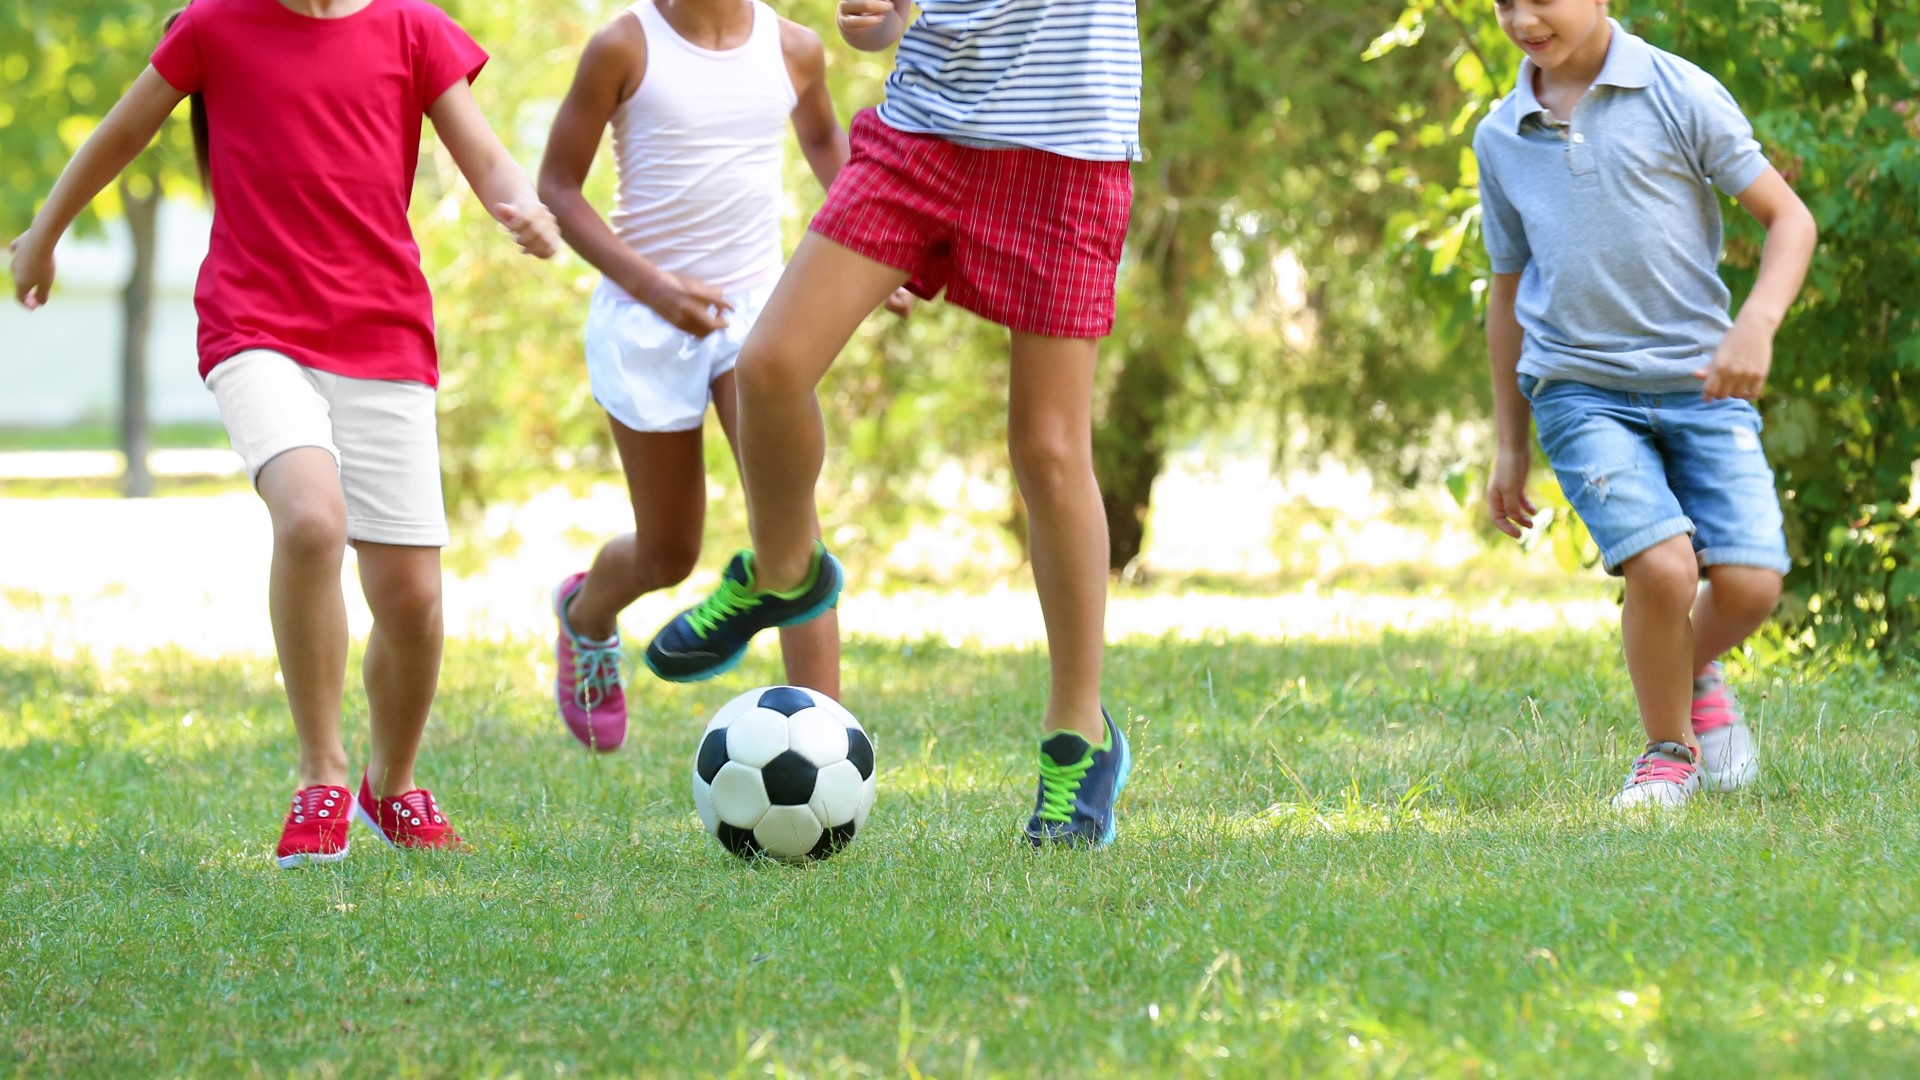 Dr. Vinitha Moopen with WellSpan Health shared tips on how to fight off summer sluggishness and keep the kids moving.